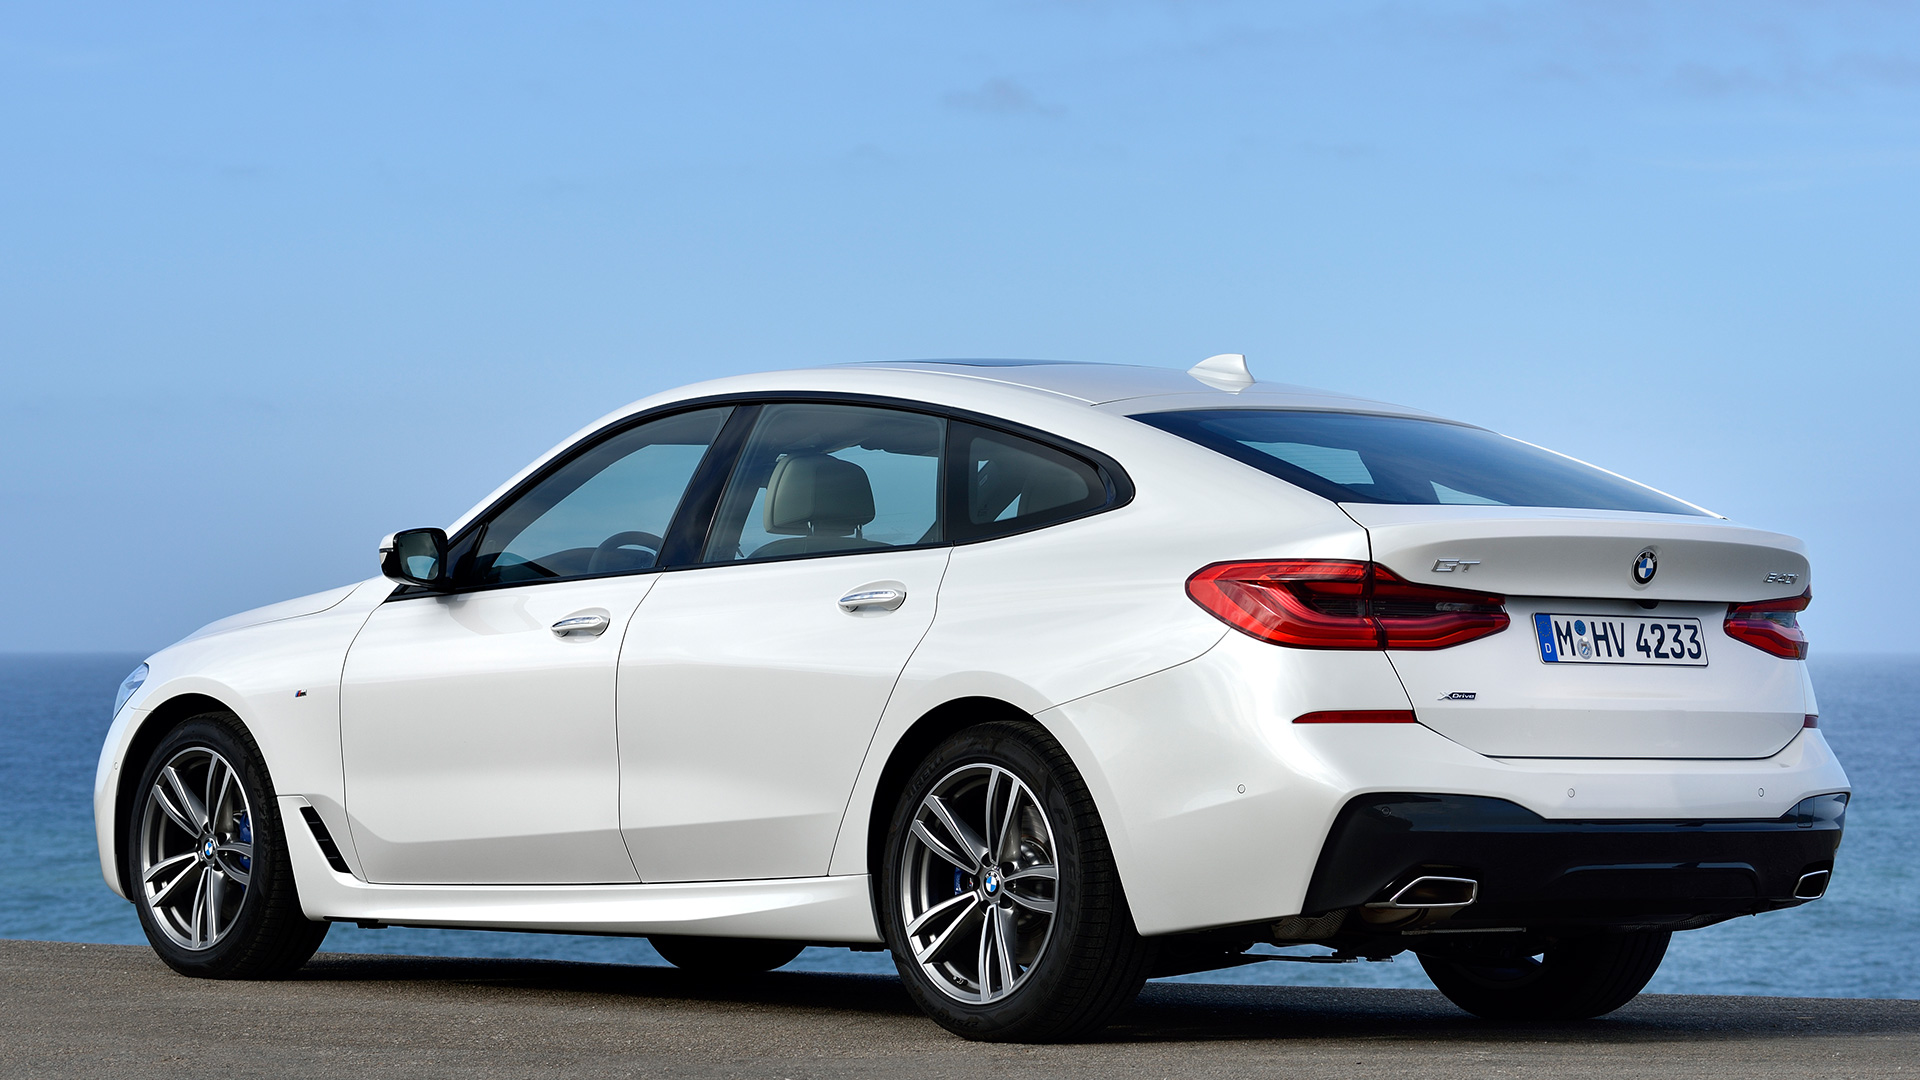 BMW 6 Series 2018 640i GT Compare